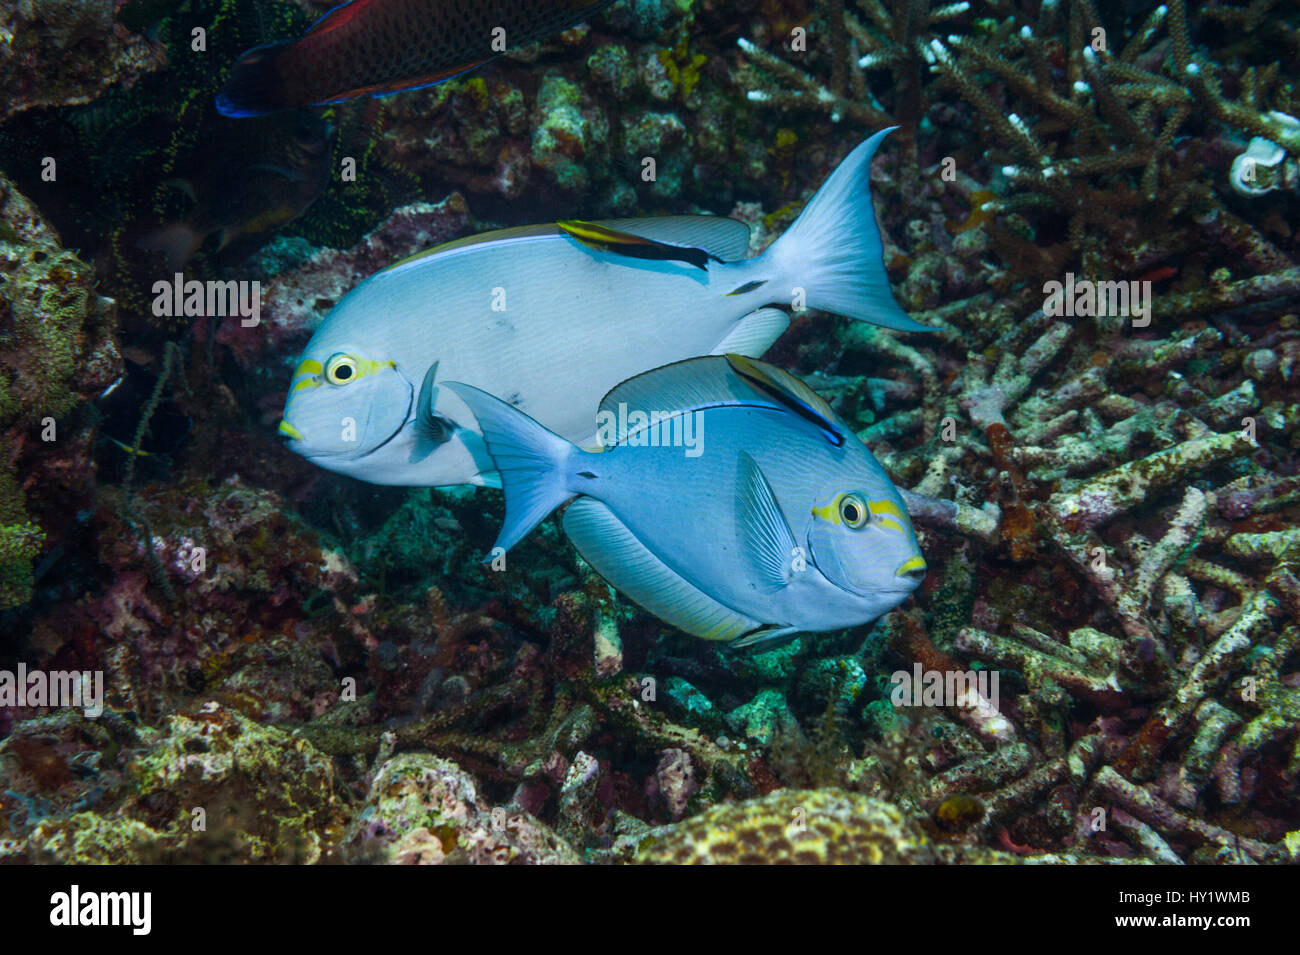 Elongate surgeonfish (Acanthurus mata) being cleaned by Black spot cleaner wrasse (Labroides pectoralis) and  Bluestreak cleaner wrasse (Labroides dimidiatus).  Indonesia. Stock Photo